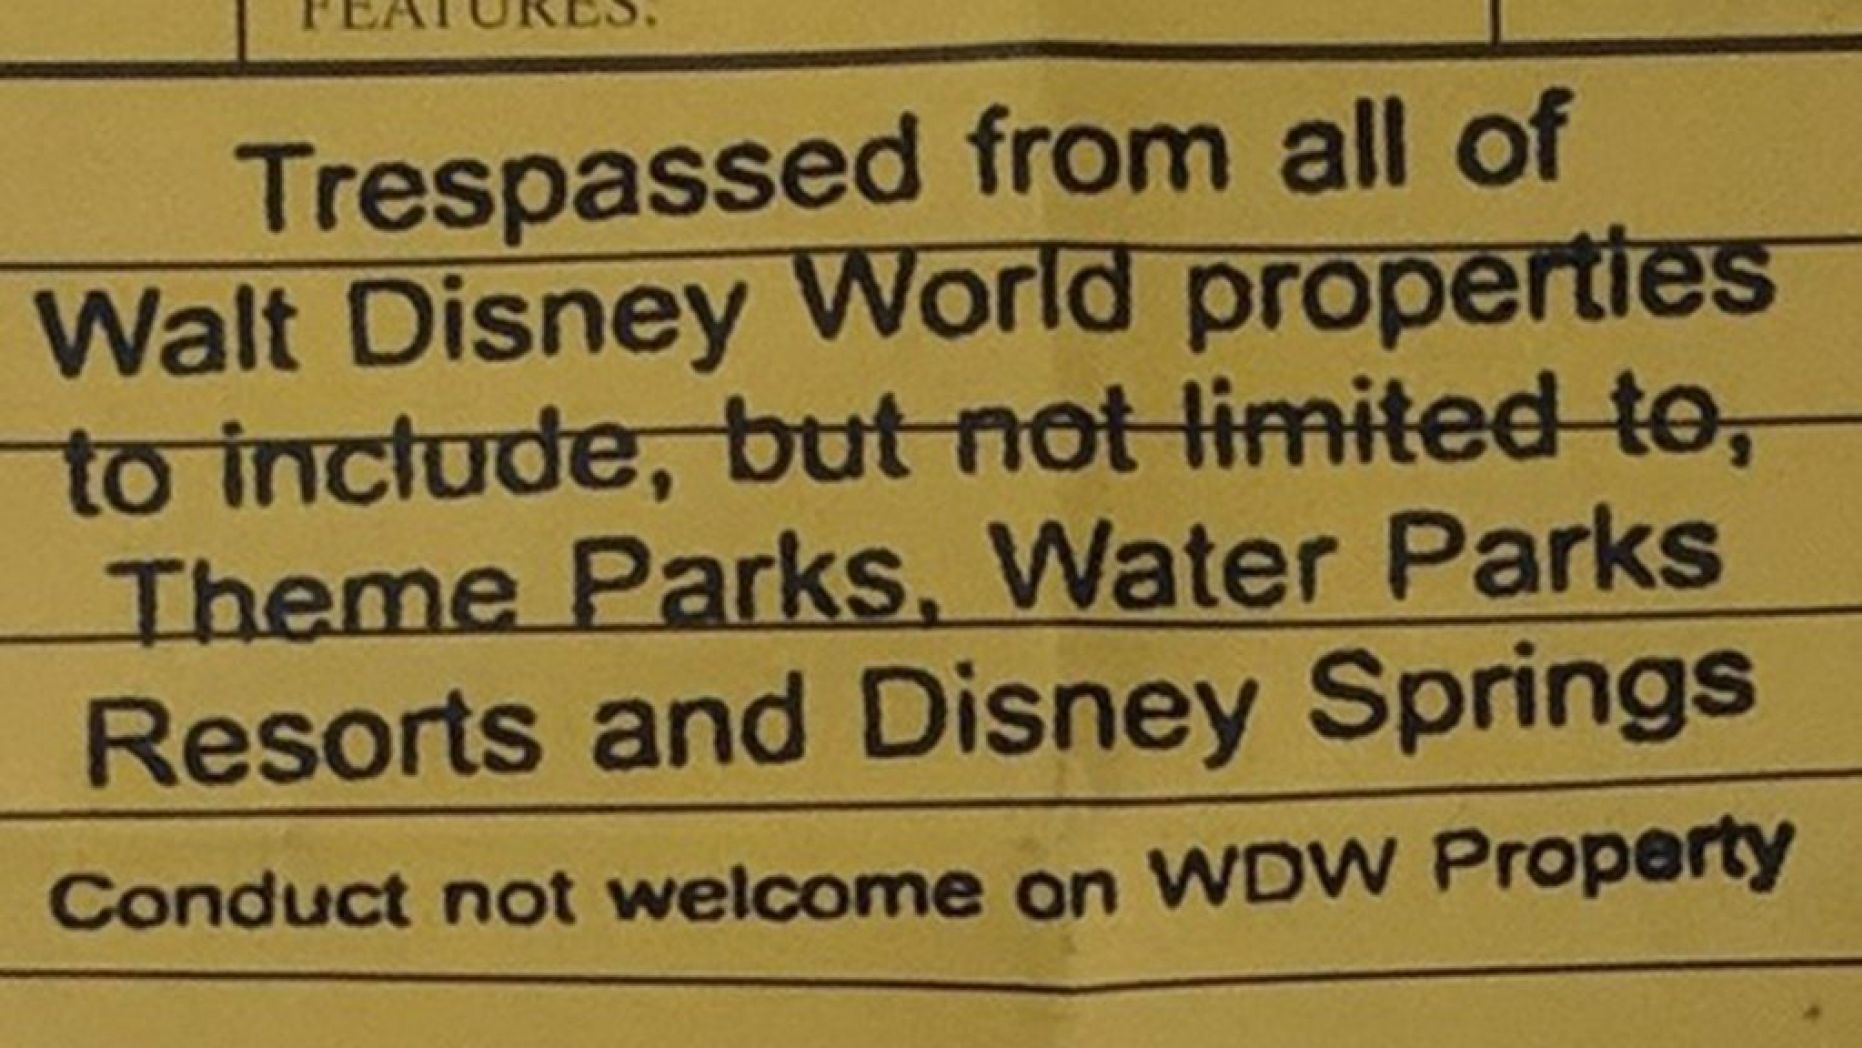 He is hereby banned from Disney Parks.